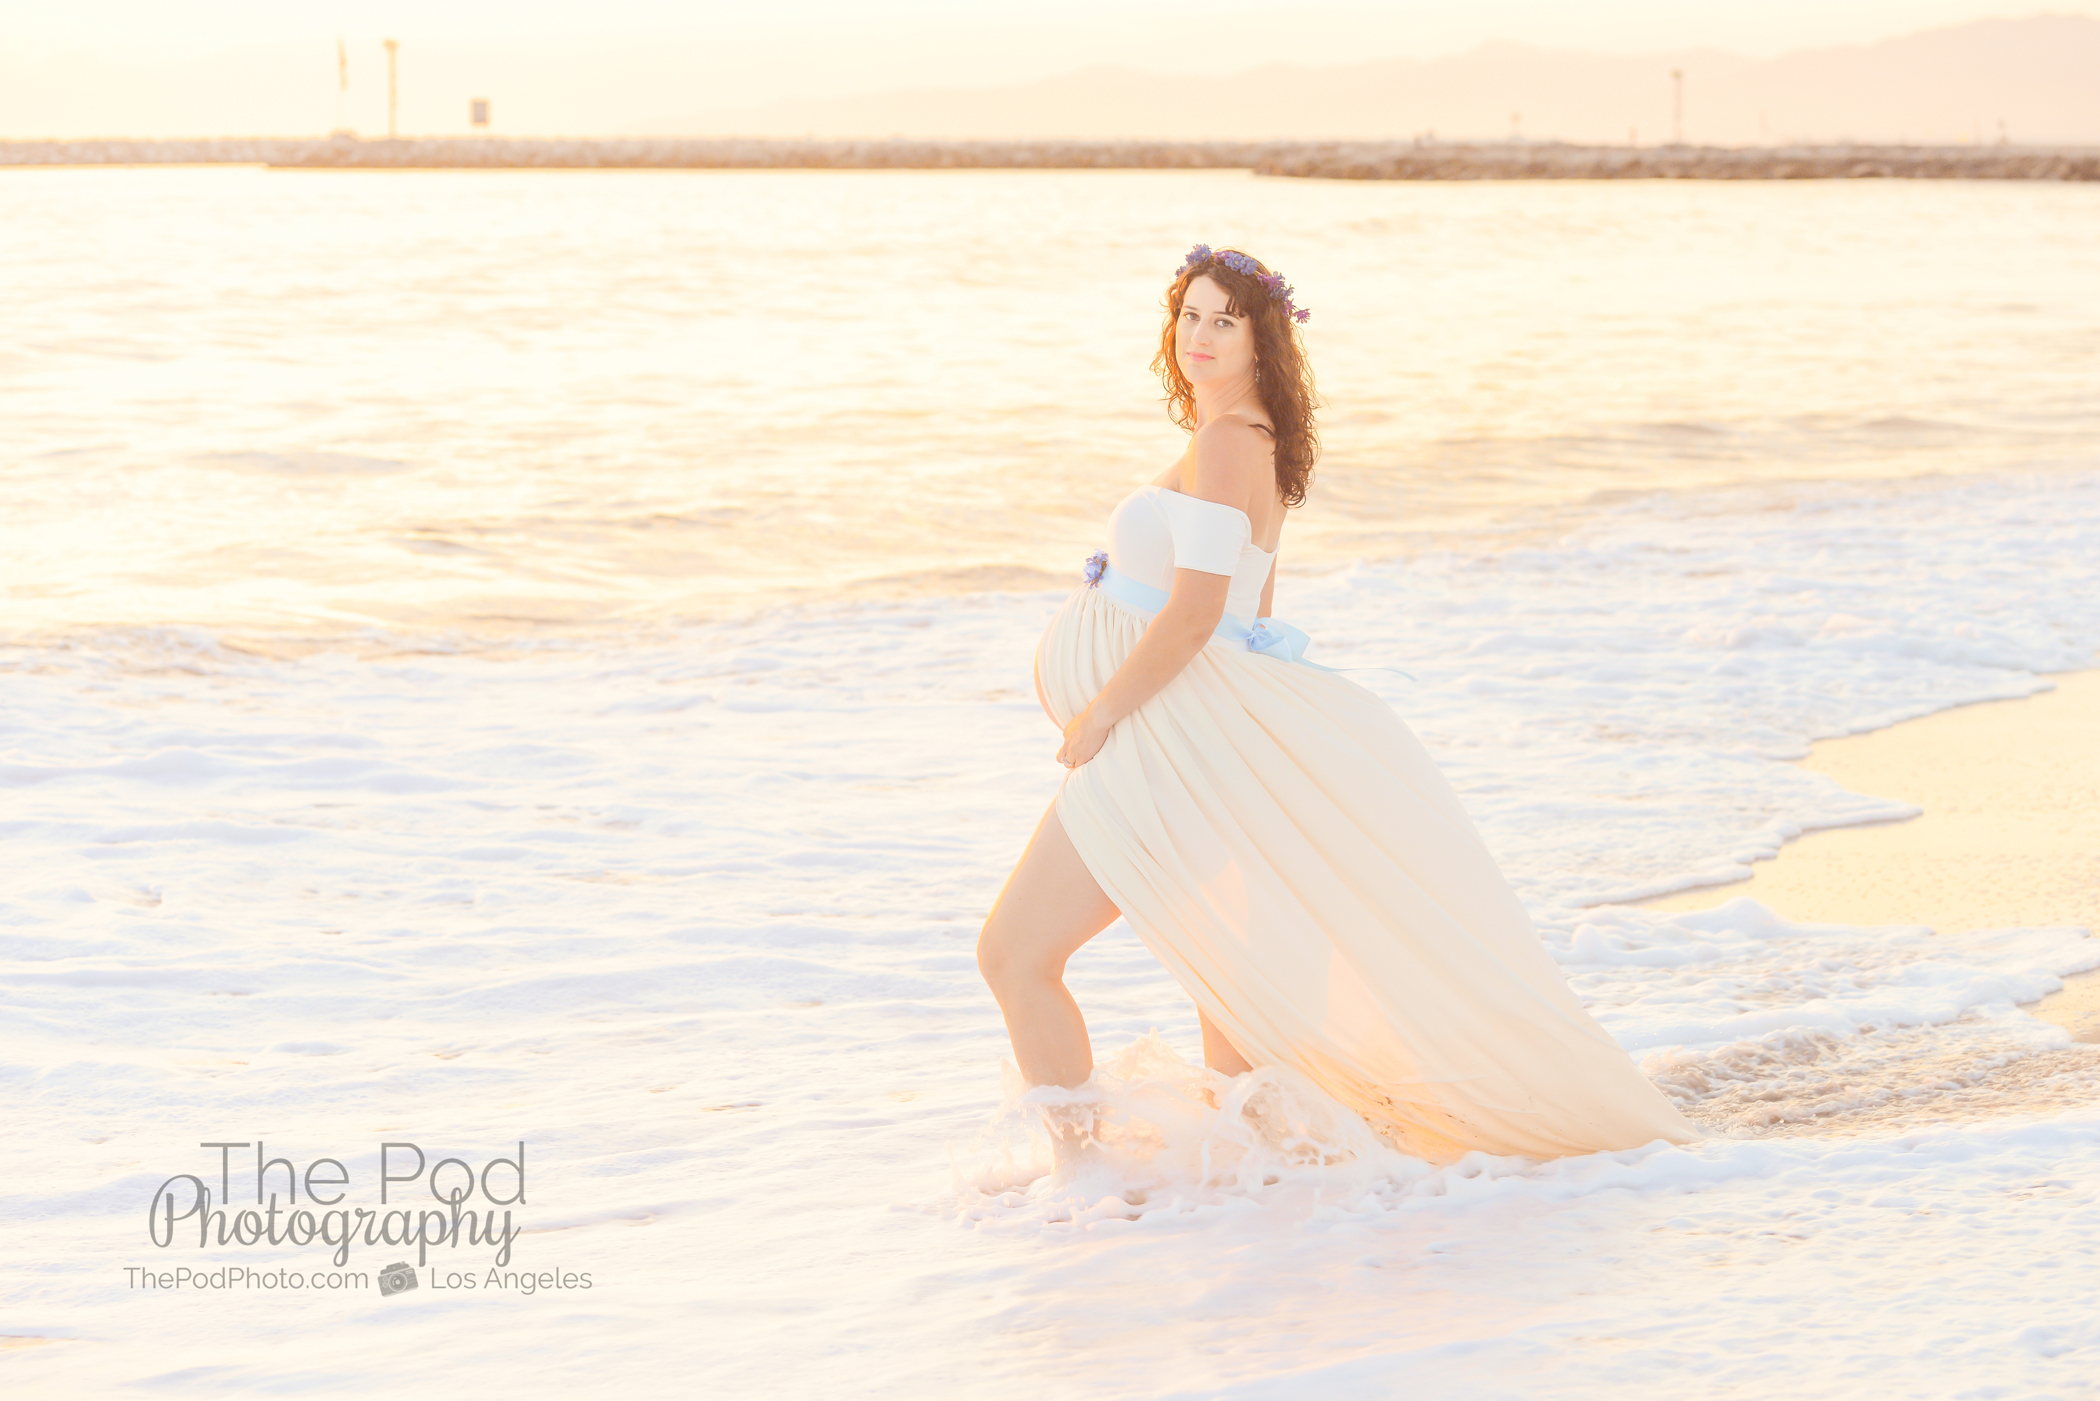 Capture the glow of motherhood in our stunning maternity gowns